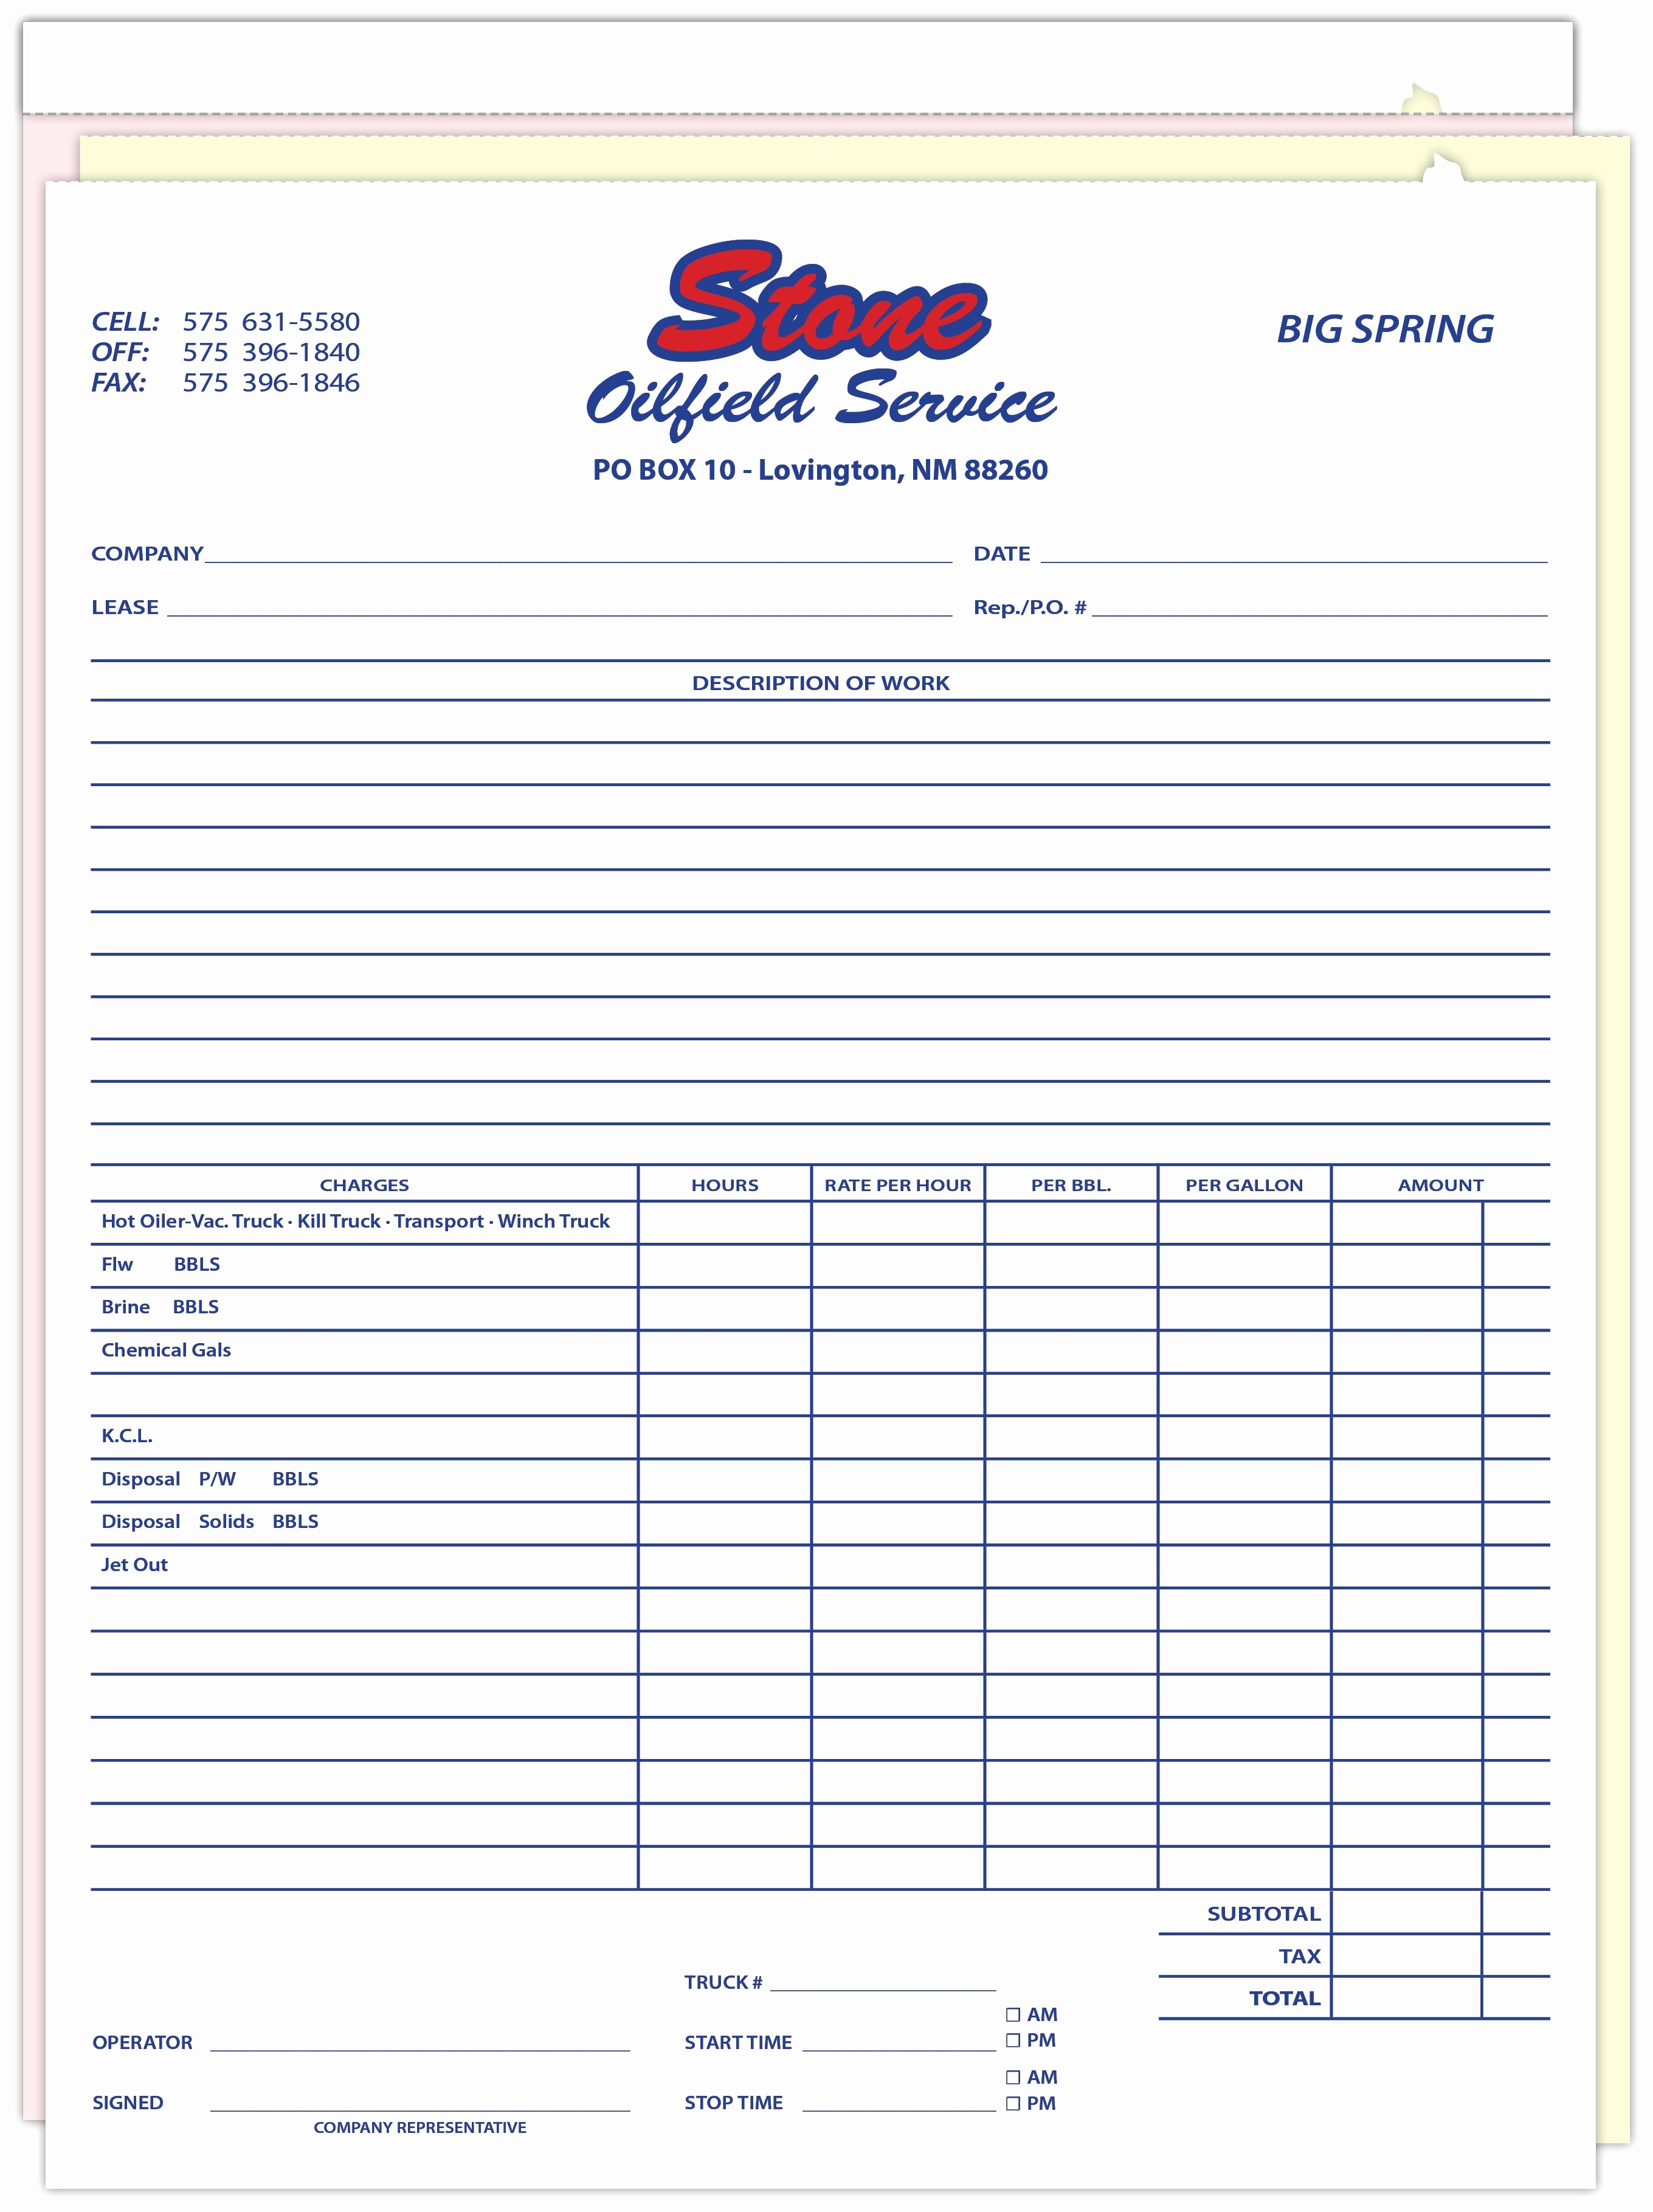 019 Templates Business Forms Free Template Staggering Ideas Small - Free Printable Business Forms